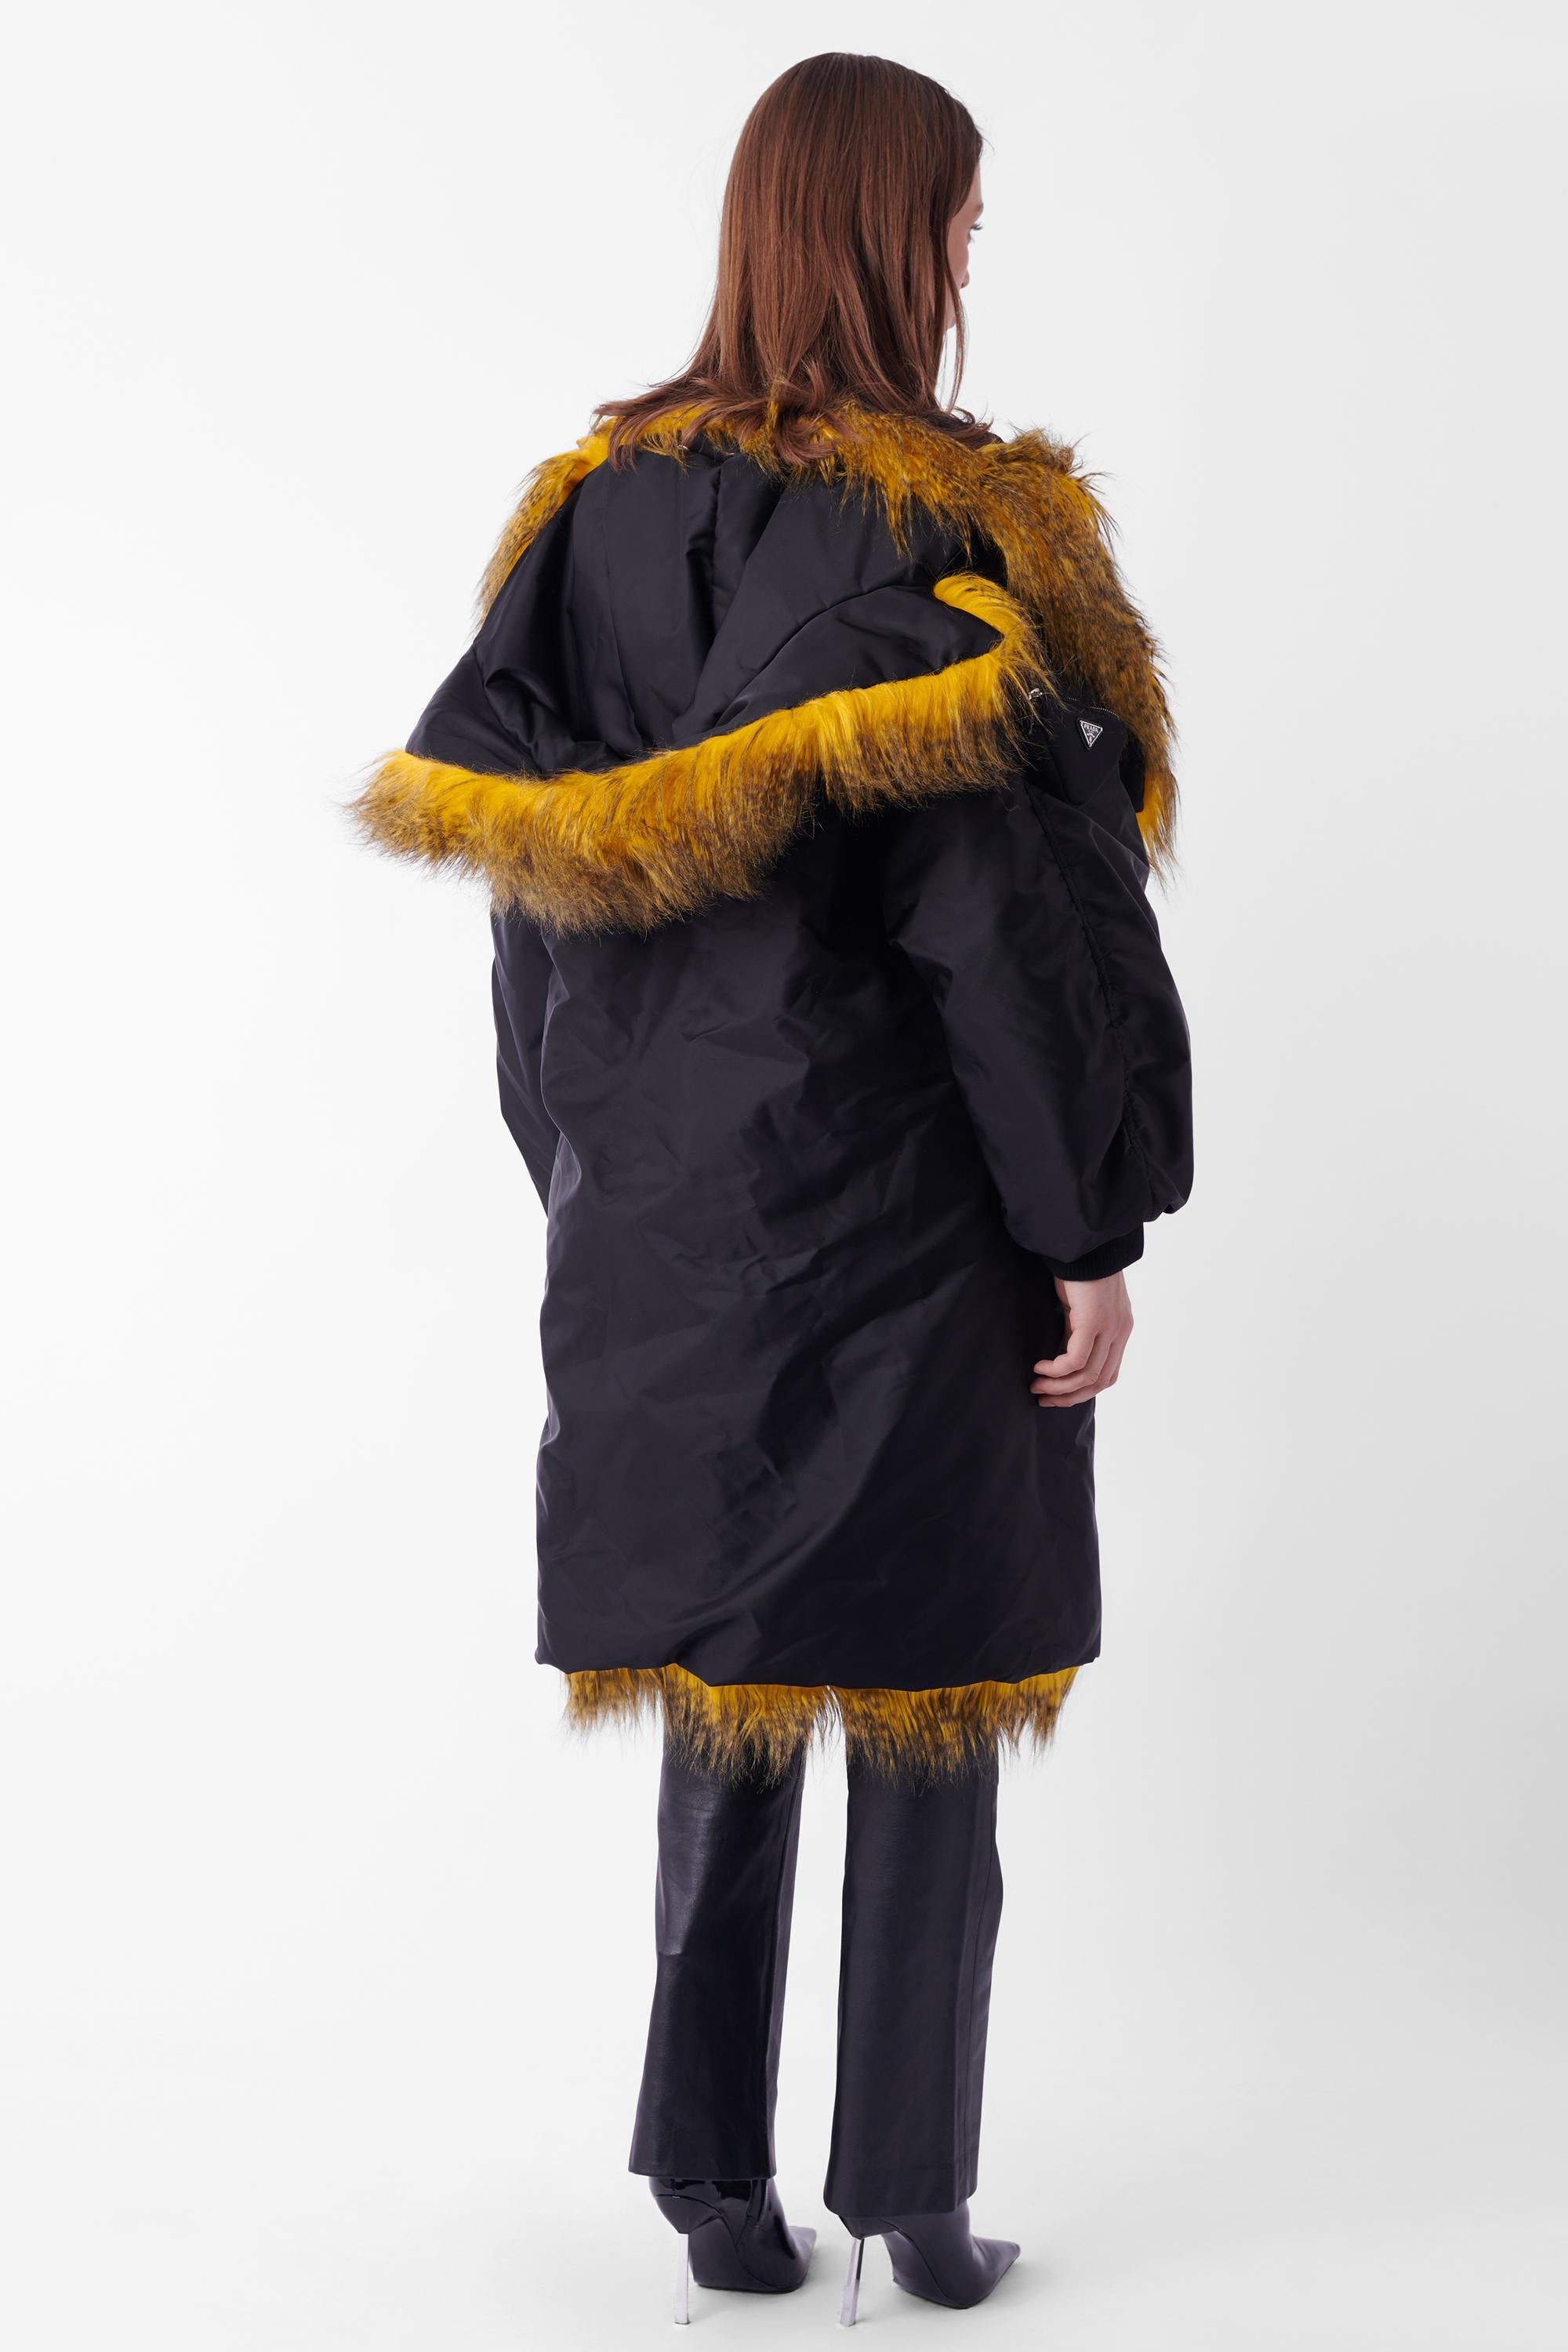 Raf Simmons for Prada Fall Winter 2021 nylon coat, runway look 31. Features black nylon outer shell, black and yellow feather inner, shoulder holds and Prada nylon pocket on arm in oversized fit. In excellent brand new condition. Please note the